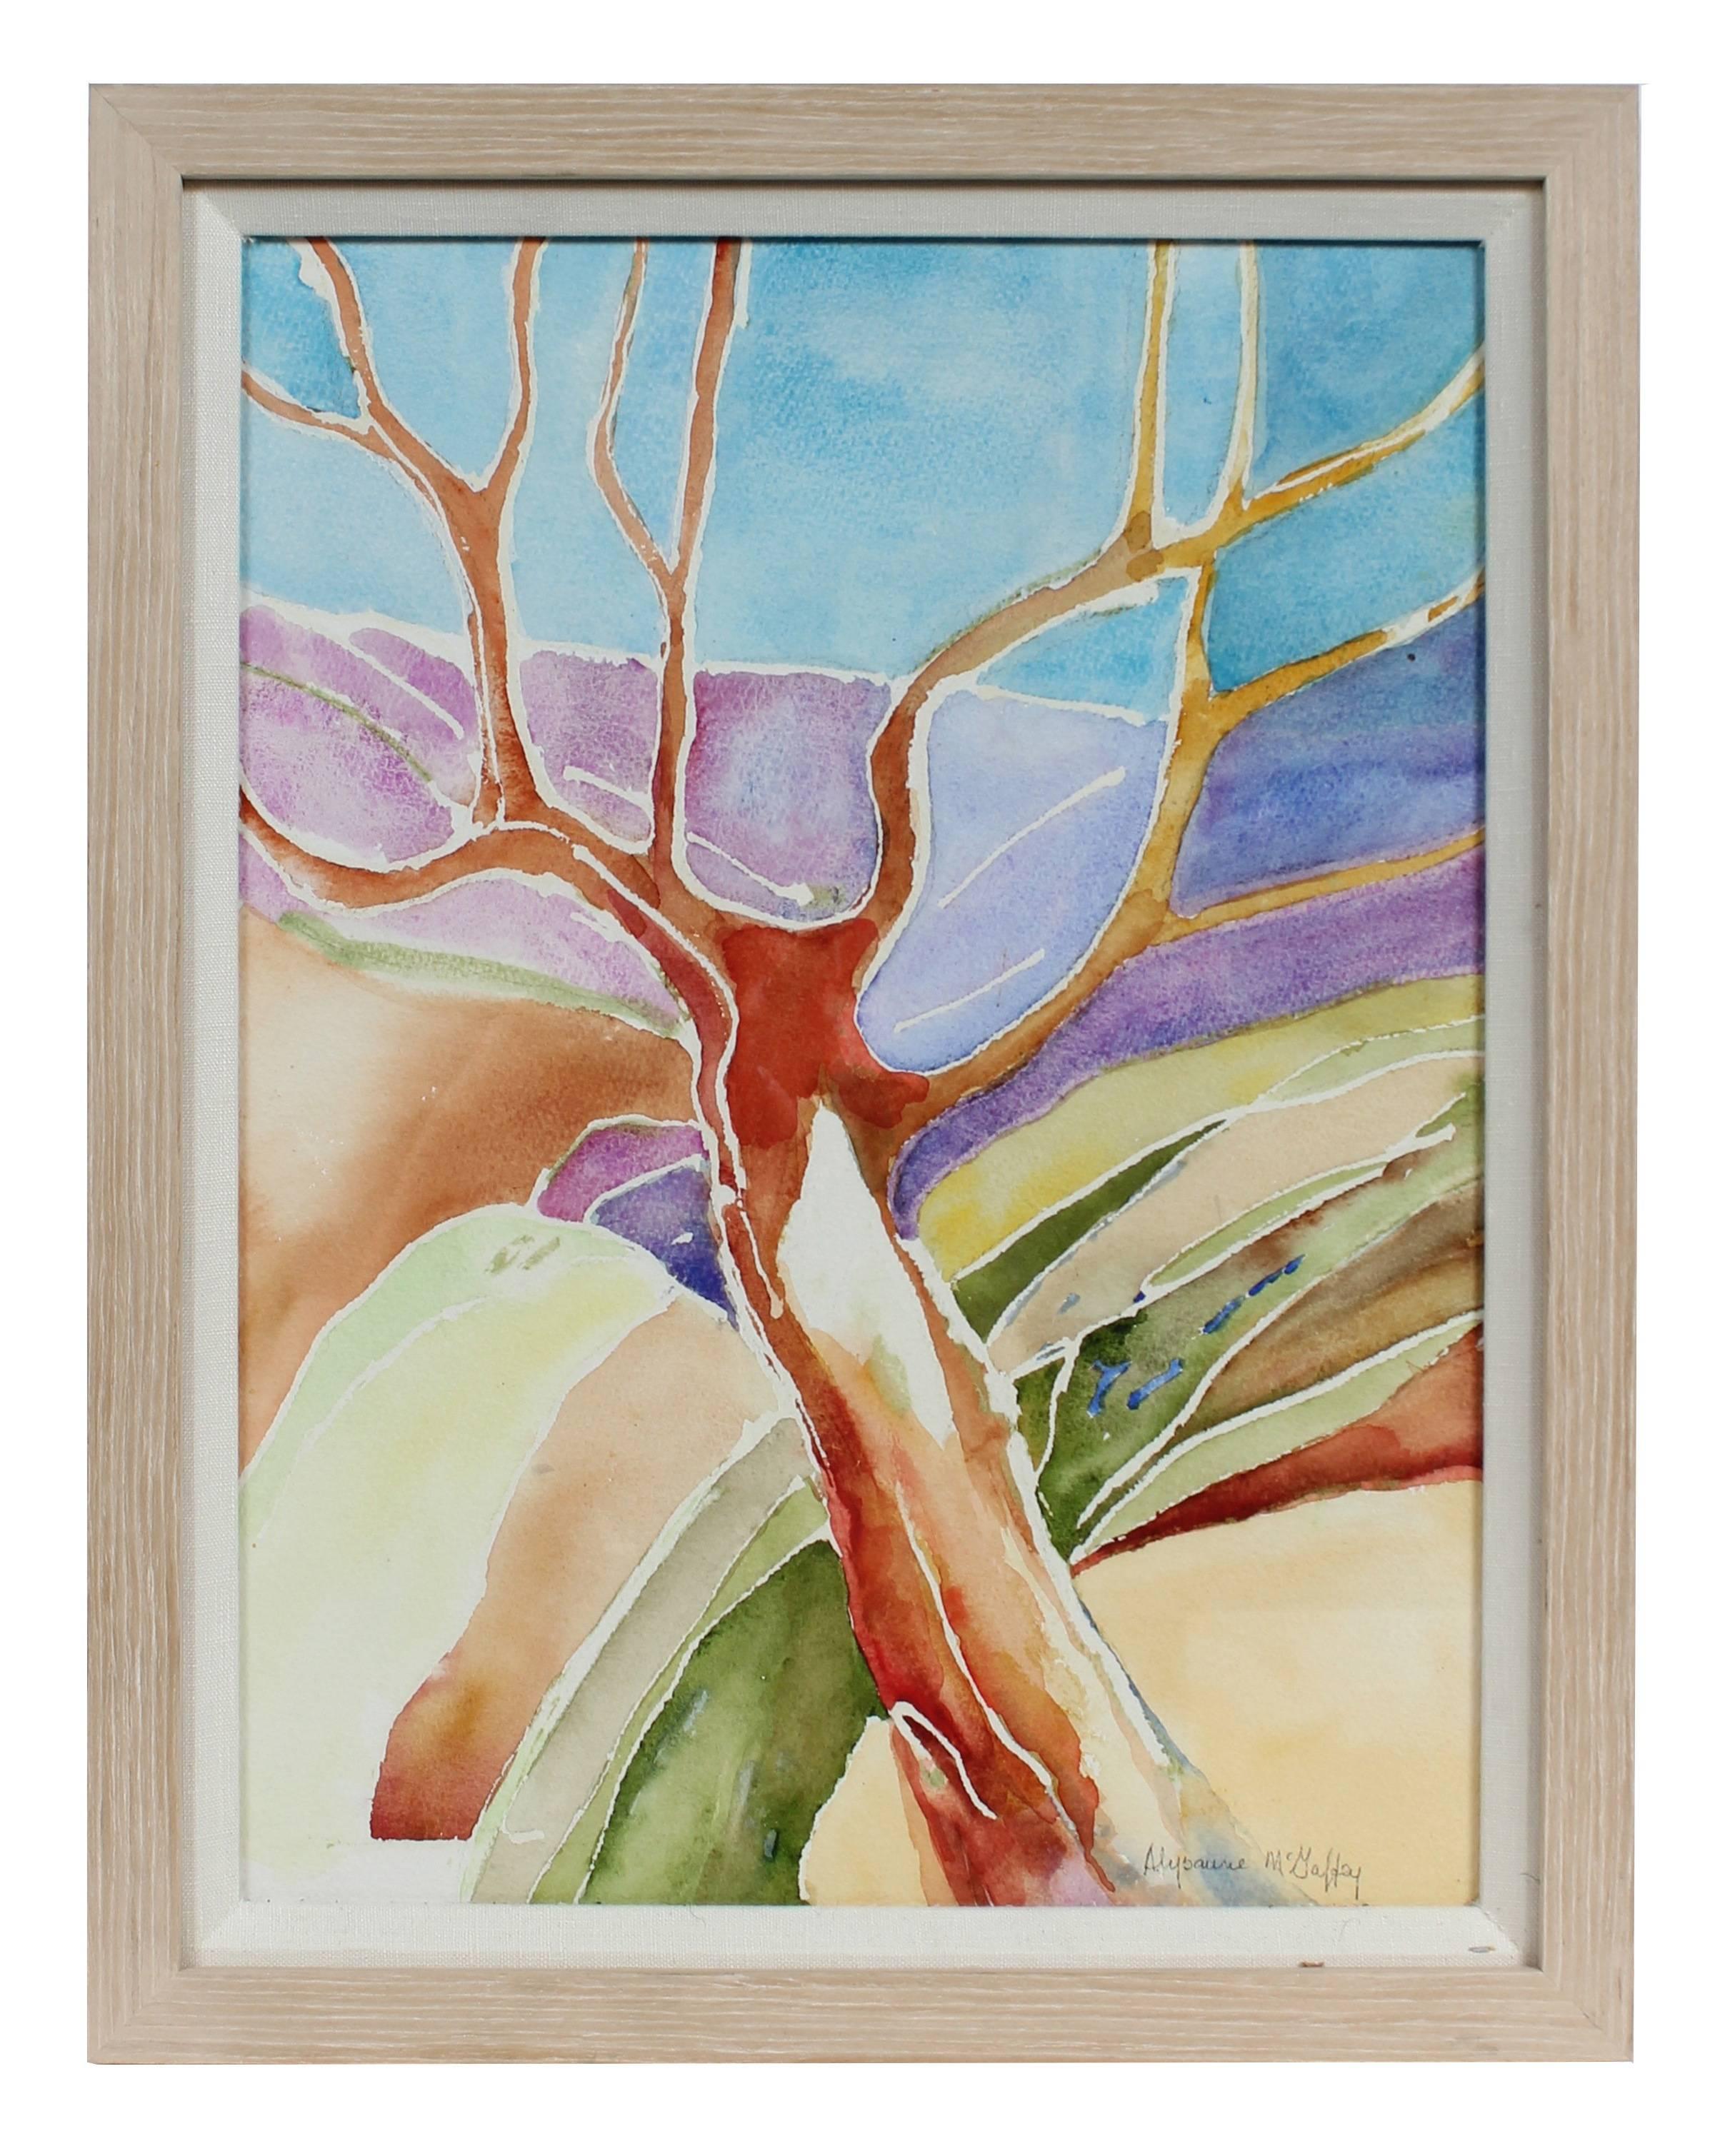 Alysanne McGaffey Landscape Art - Colorful Tree in a Landscape, Watercolor Painting, Late 20th Century